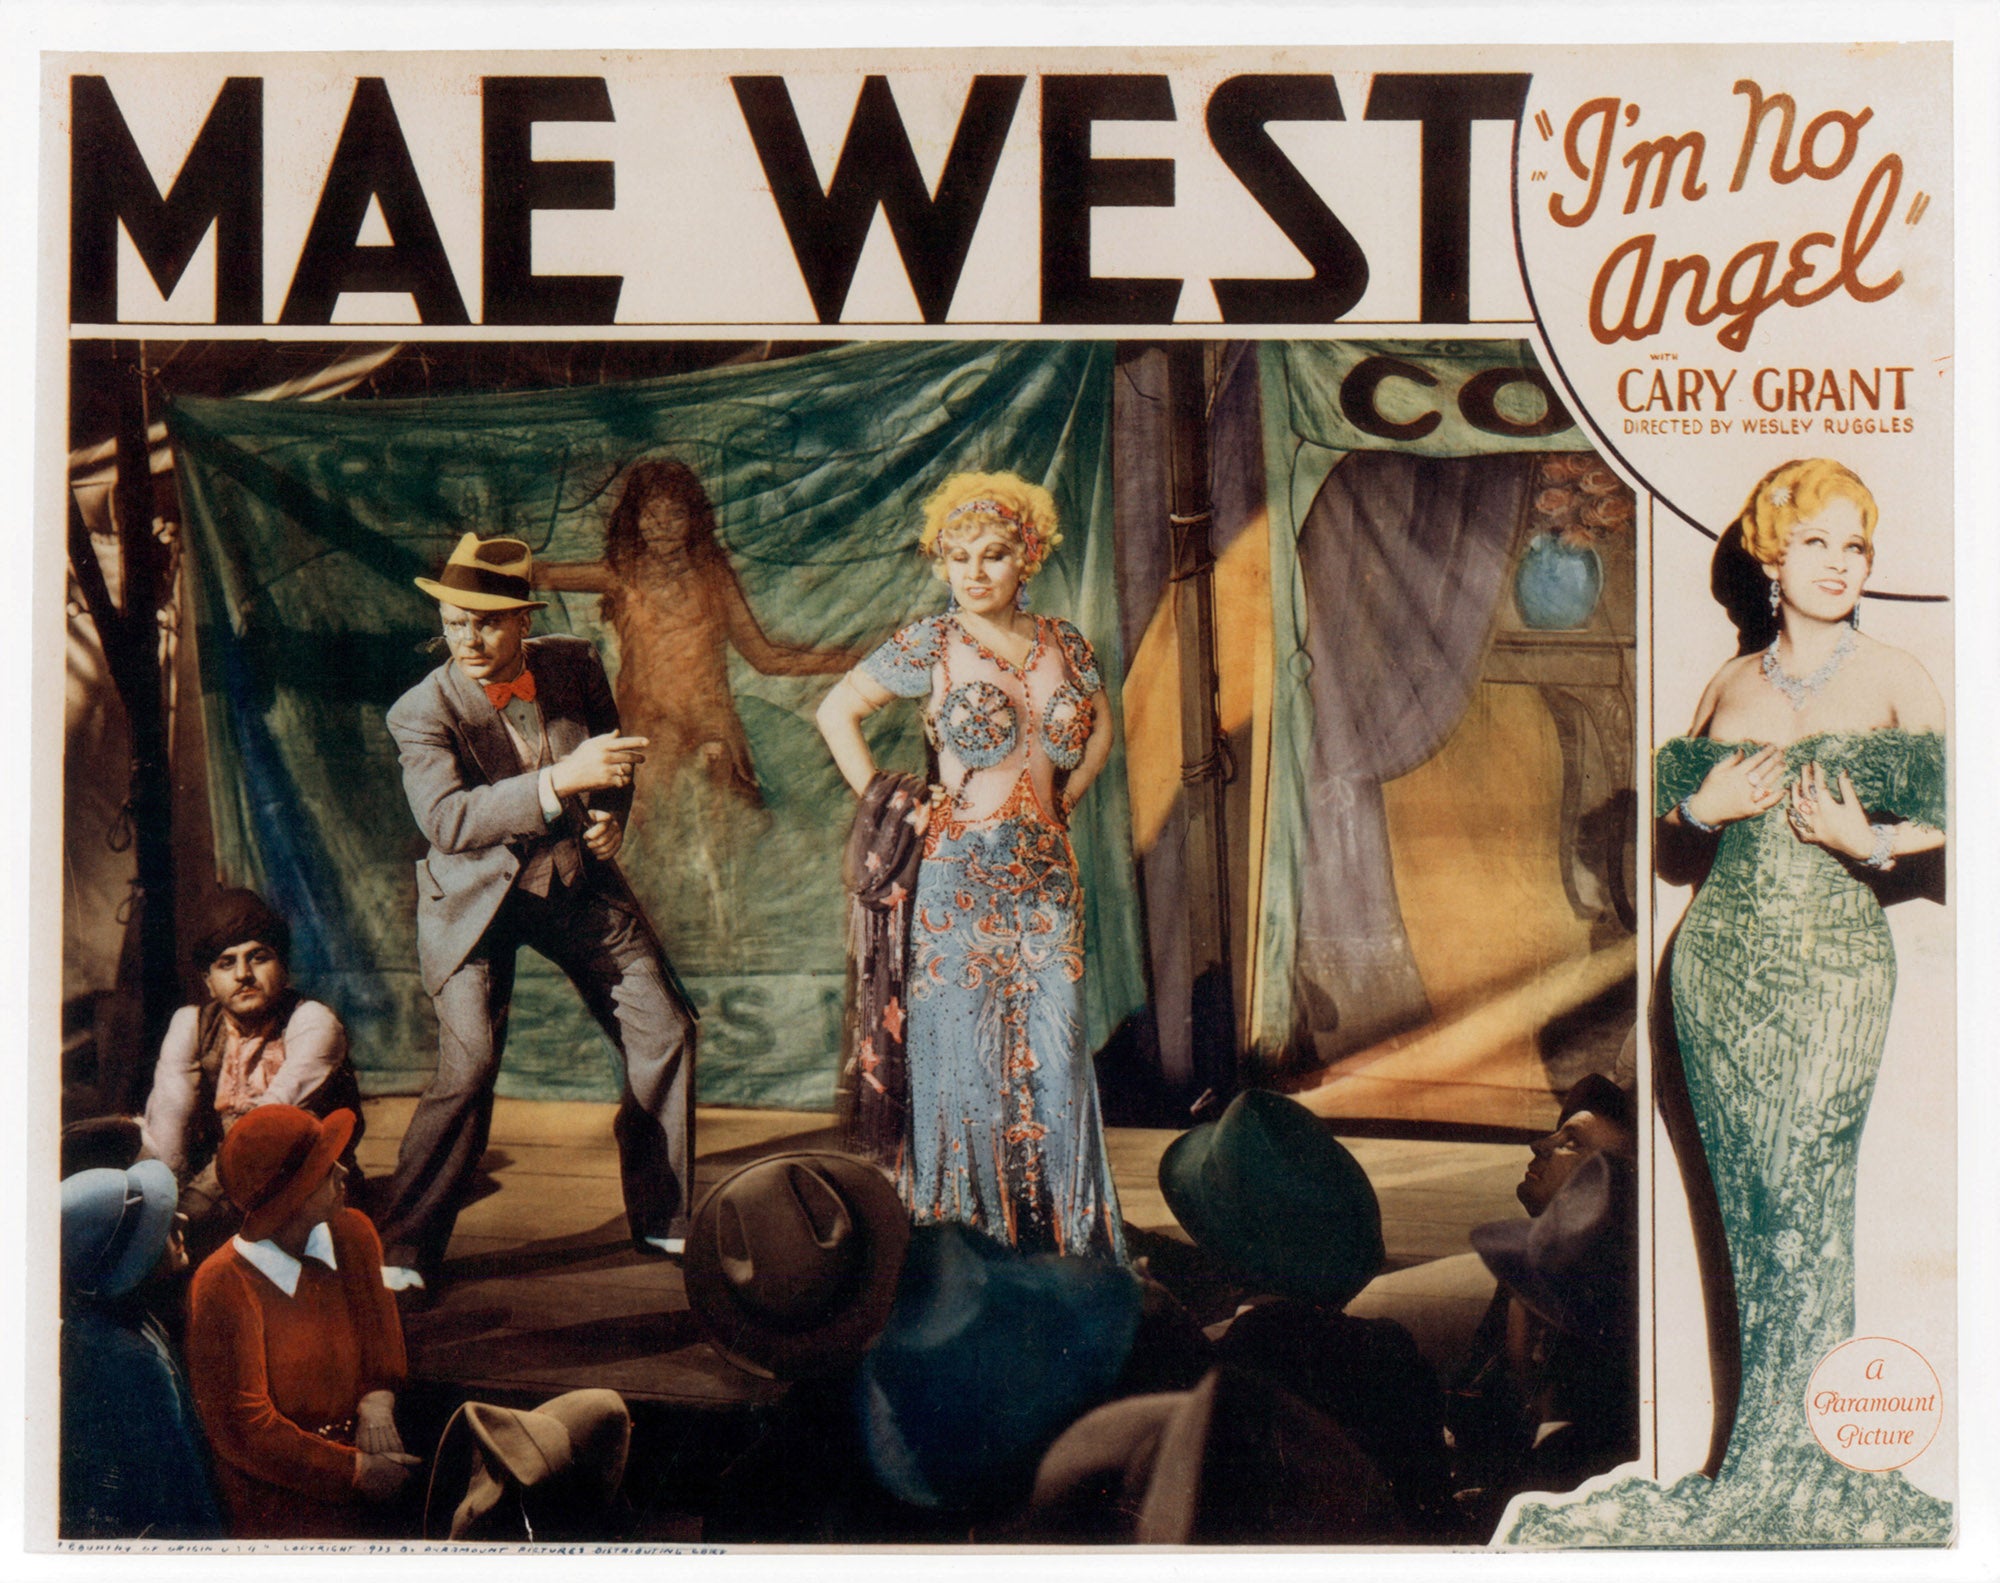 Mae West is presented on stage in a scene from the film 'I'm No Angel', 1933.